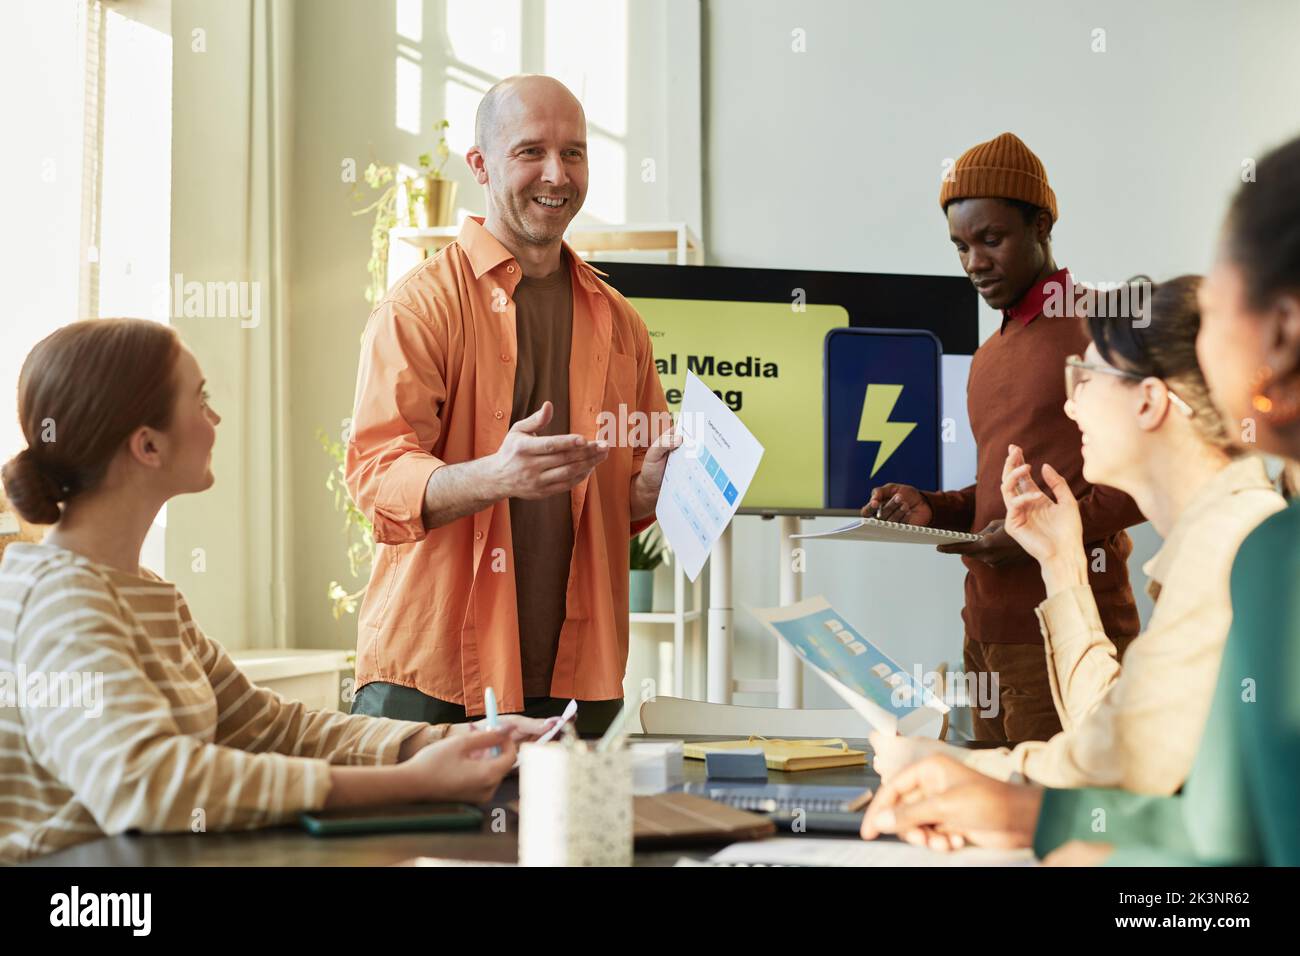 Portrait of creative team meeting in office with focus on smiling businessman giving marketing presentation Stock Photo